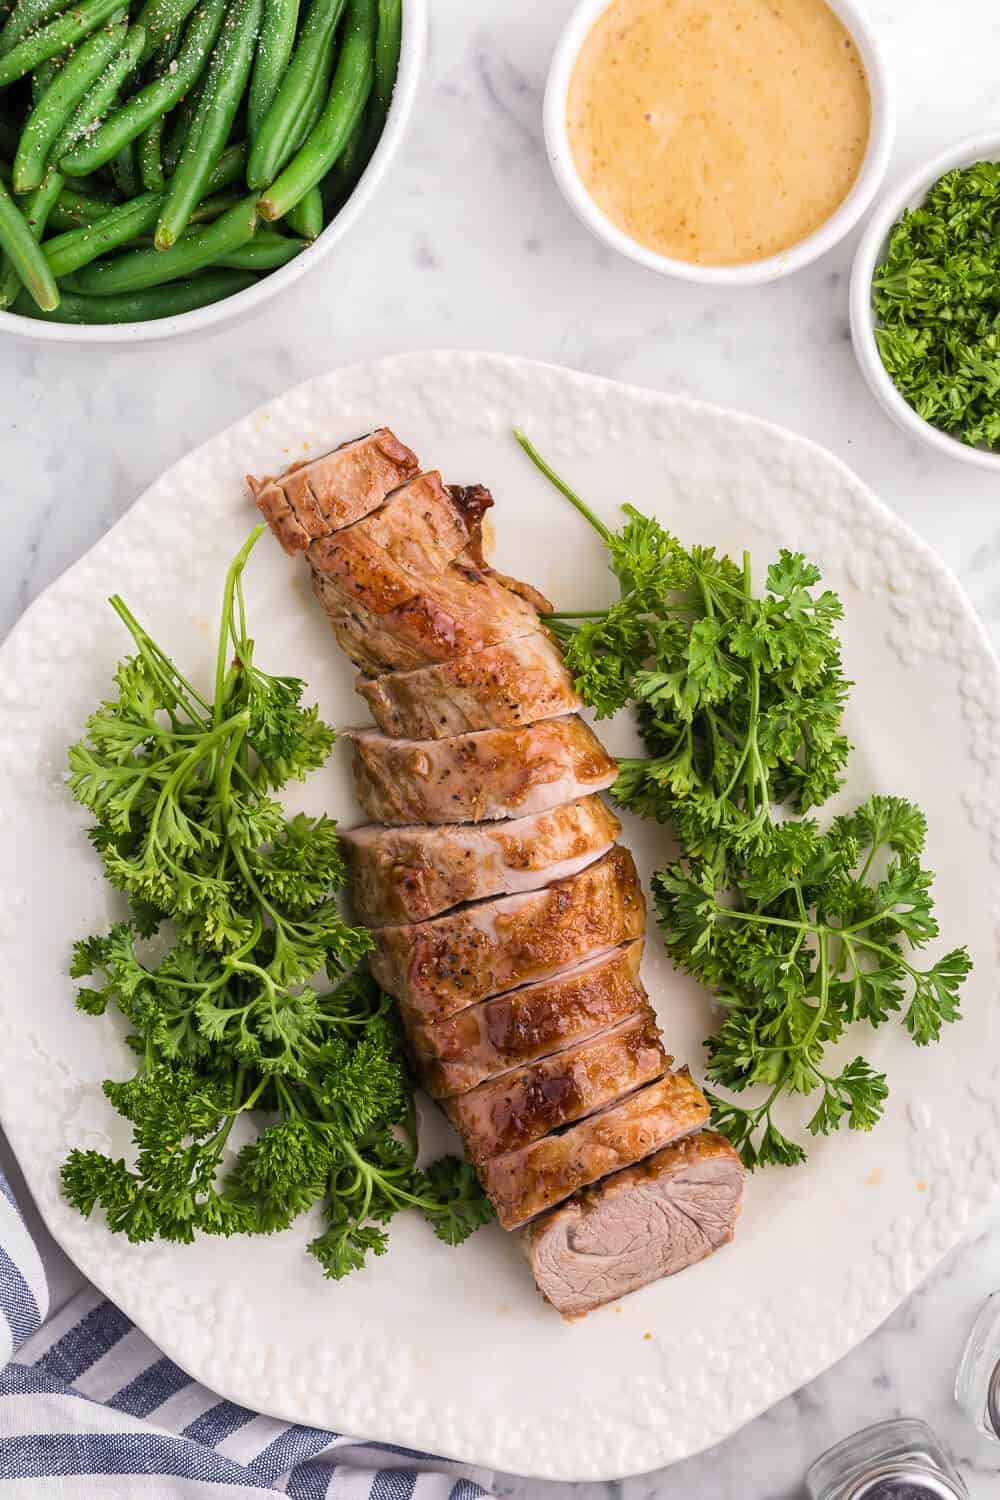 Brown Sugar Dijon Pork Tenderloin - Only two ingredients for this delicious dinner recipe! This sweet and savory glaze goes perfectly with the tender, juicy pork.